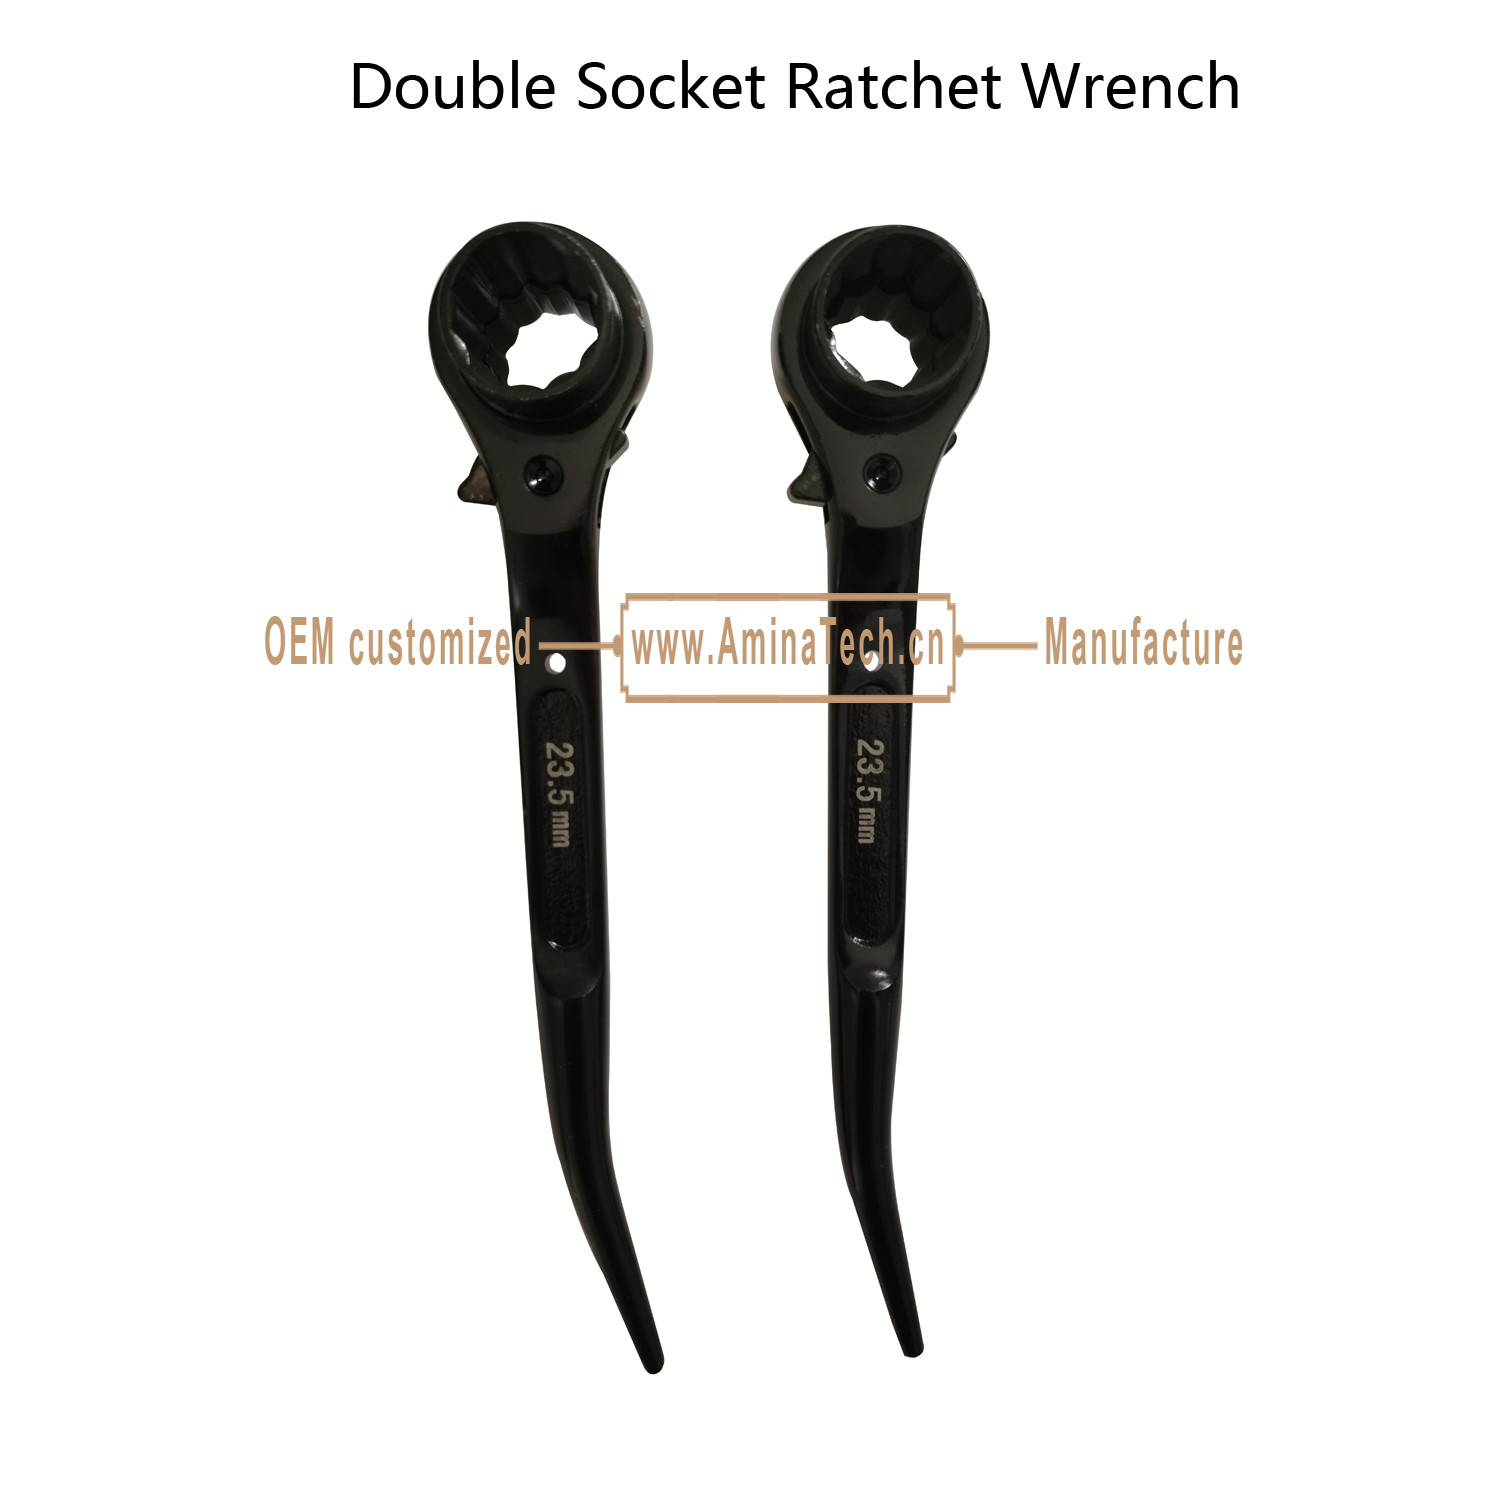 China Double Socket Ratchet Wrench factory